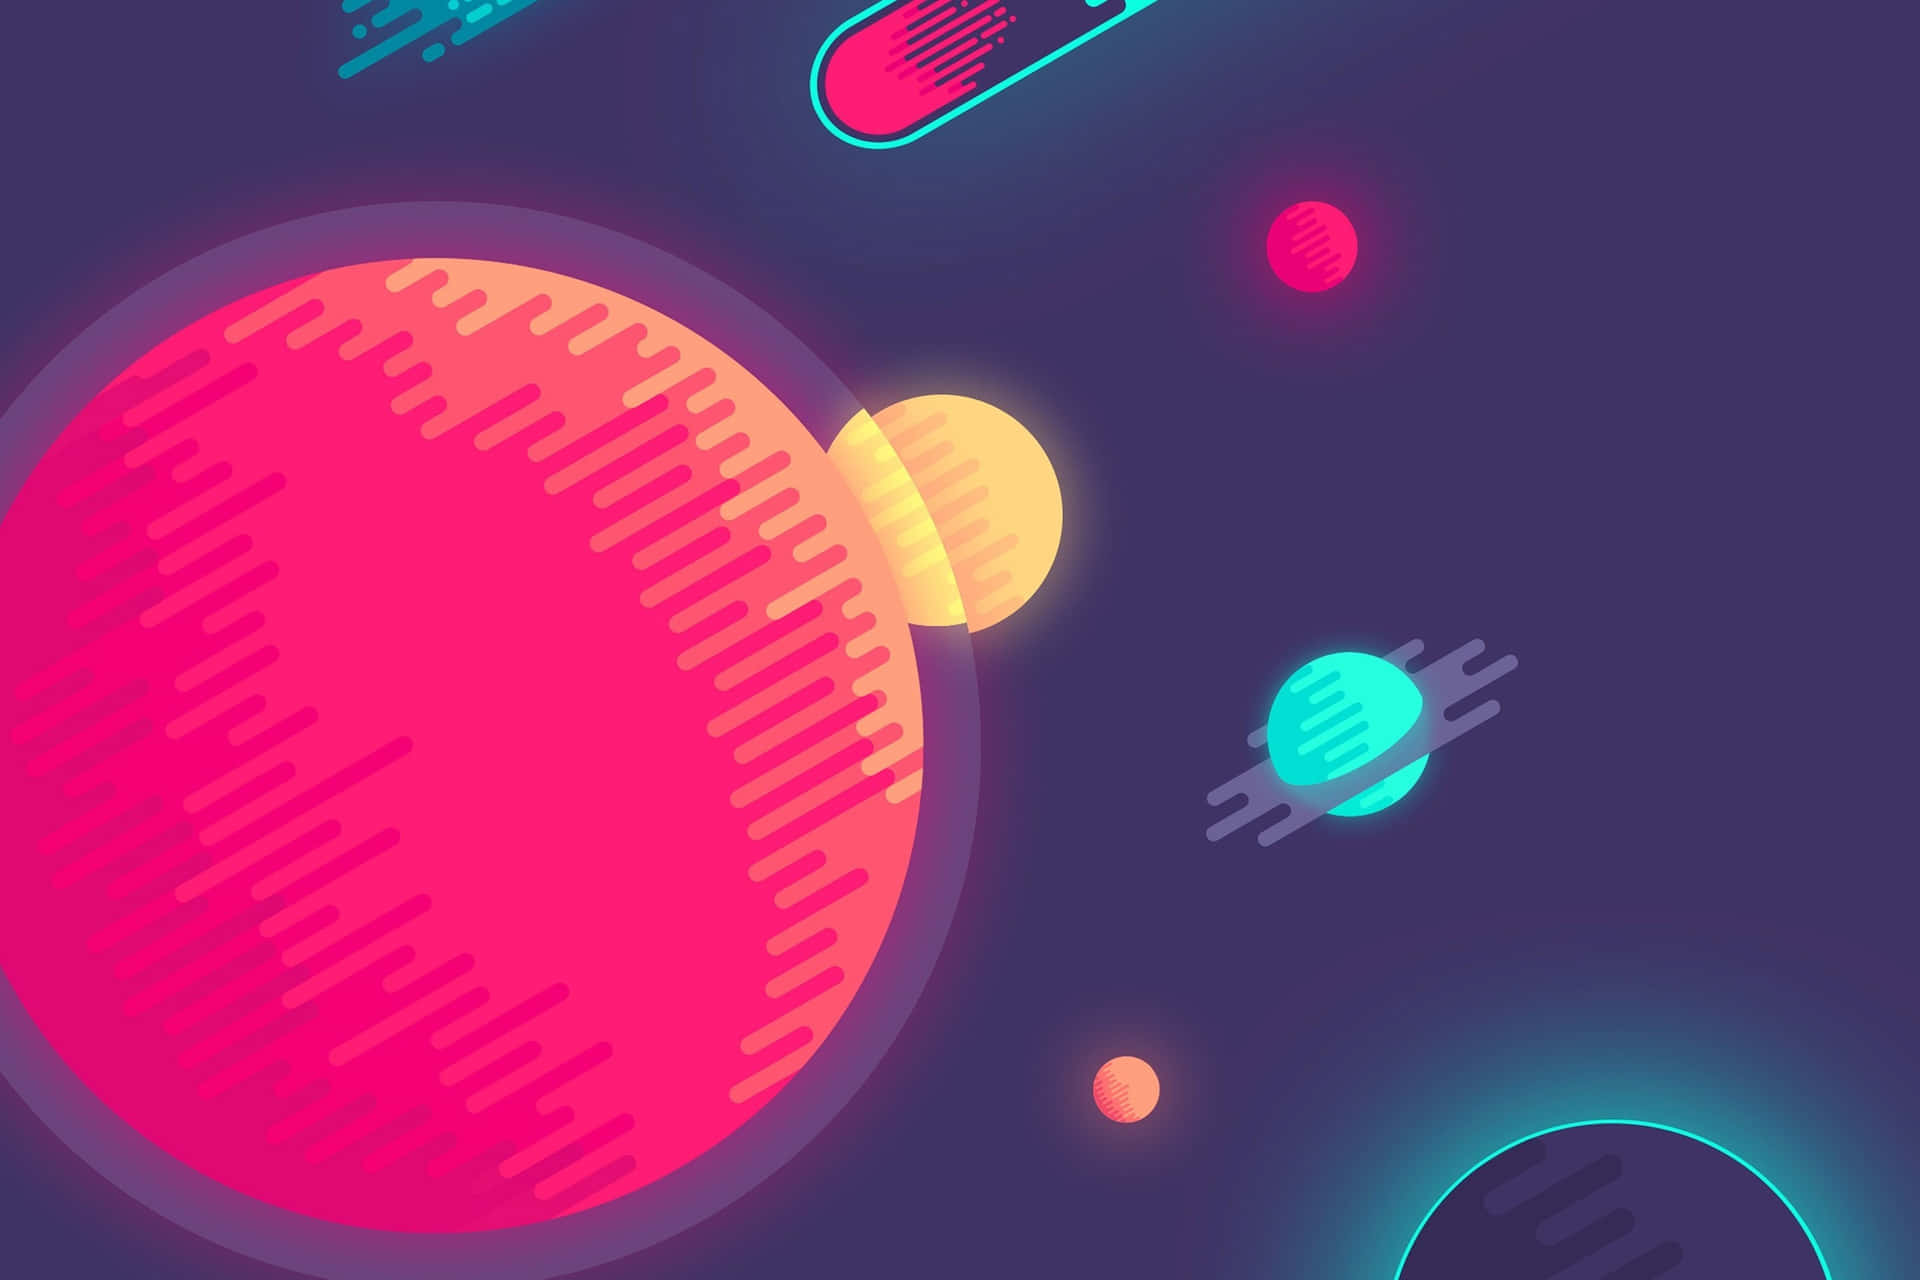 Decorate your PC with this Cute Planets Wallpaper